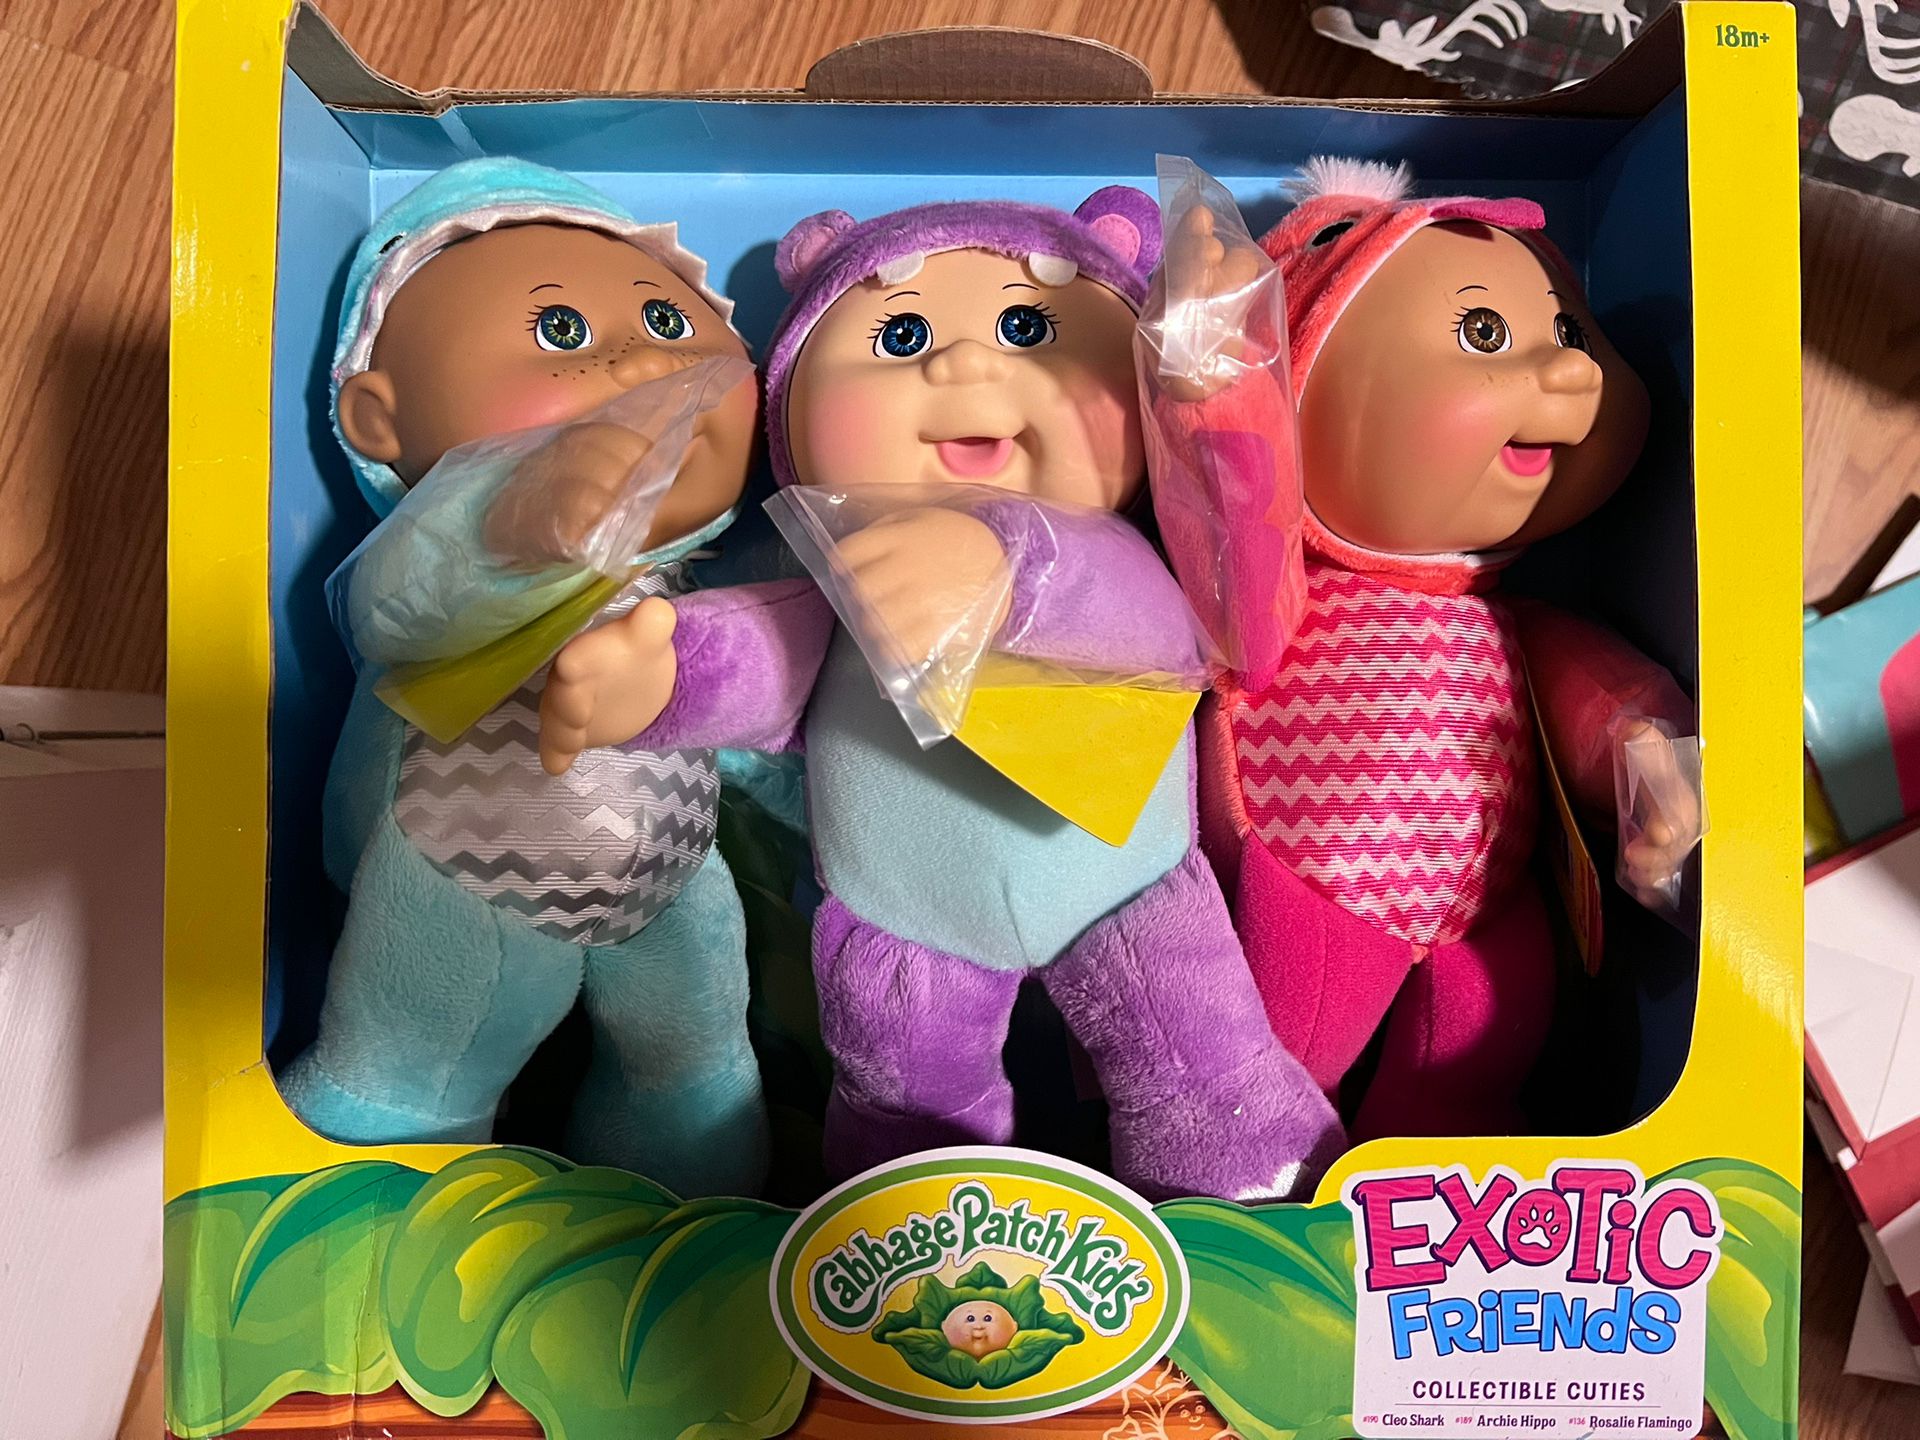 Cabbage Patch Kids Exotic Friends Cuties 3 Soft Dolls Set NEW IN BOX with TAGS